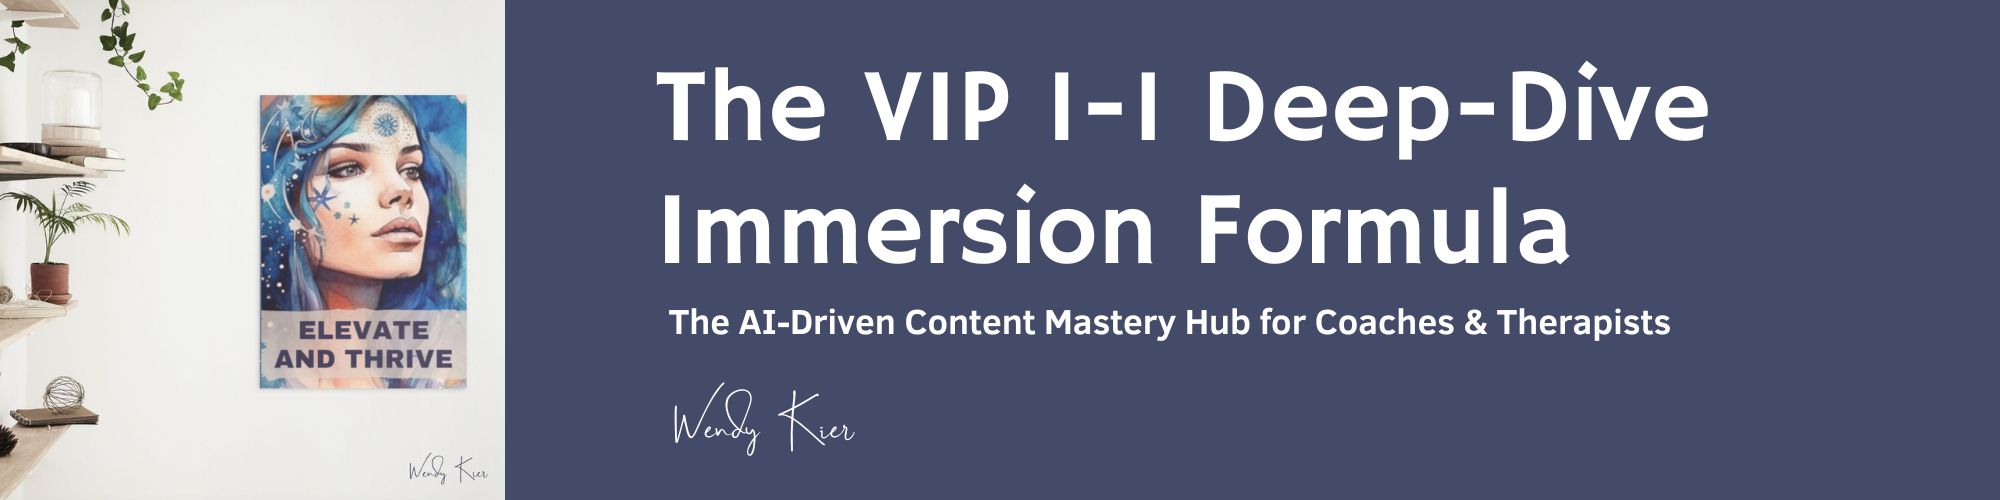 The VIP 1-1 Deep-Dive Immersion Formula